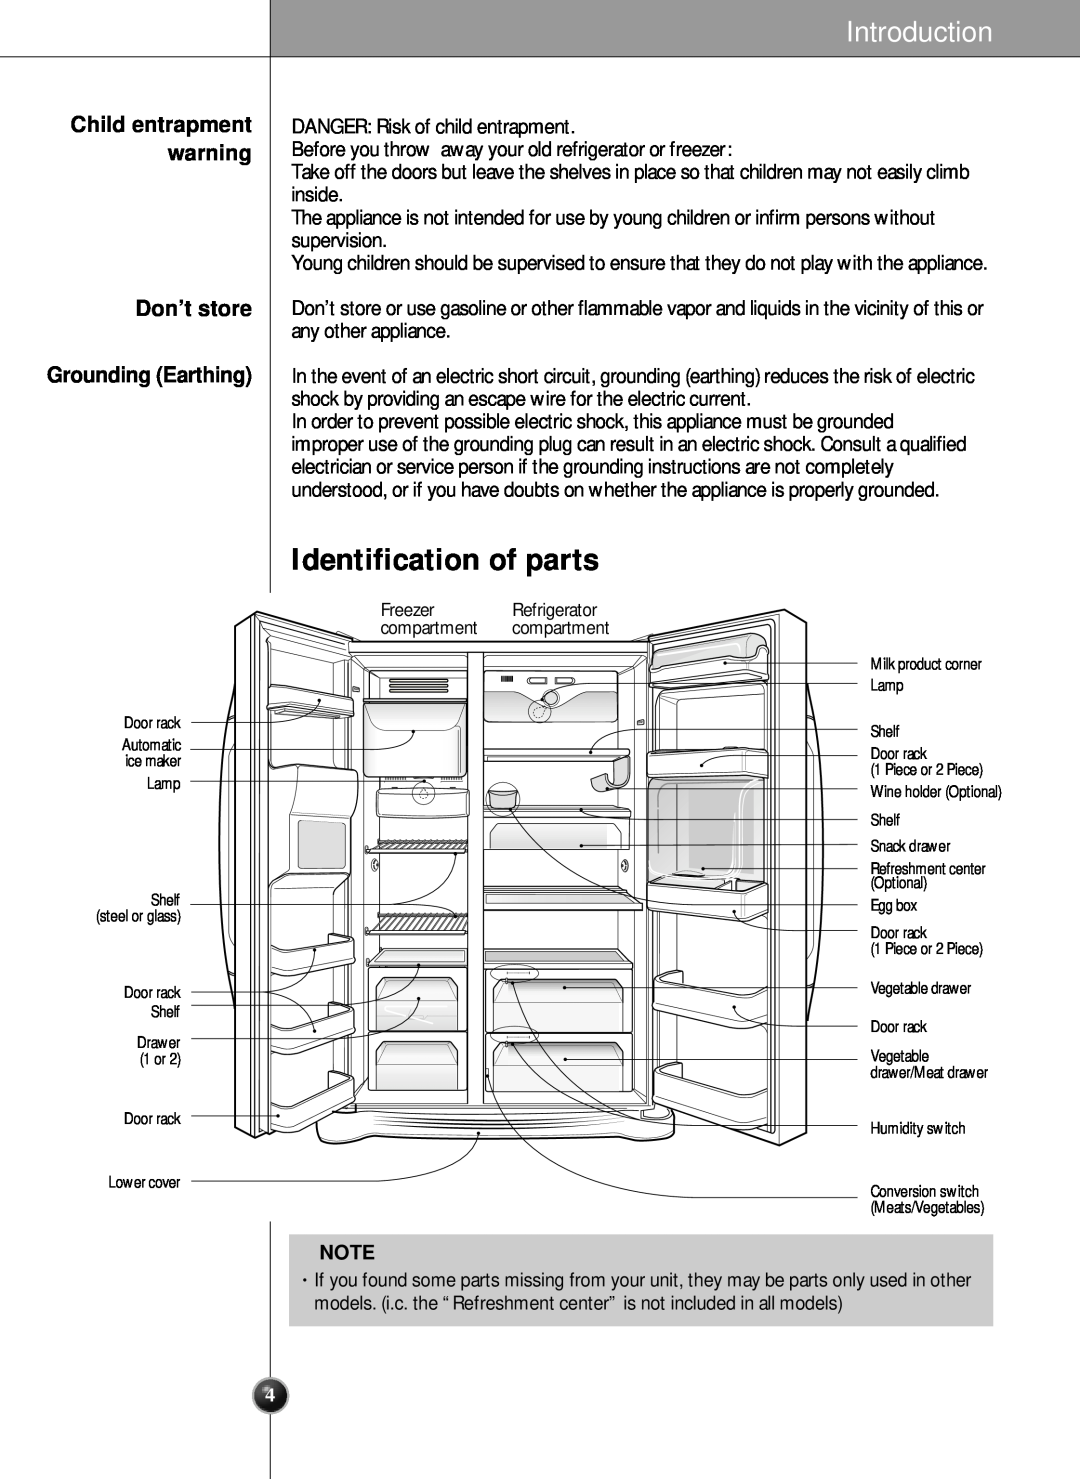 LG Electronics SXS manual Identification of parts, Don’t store Grounding Earthing, Introduction 